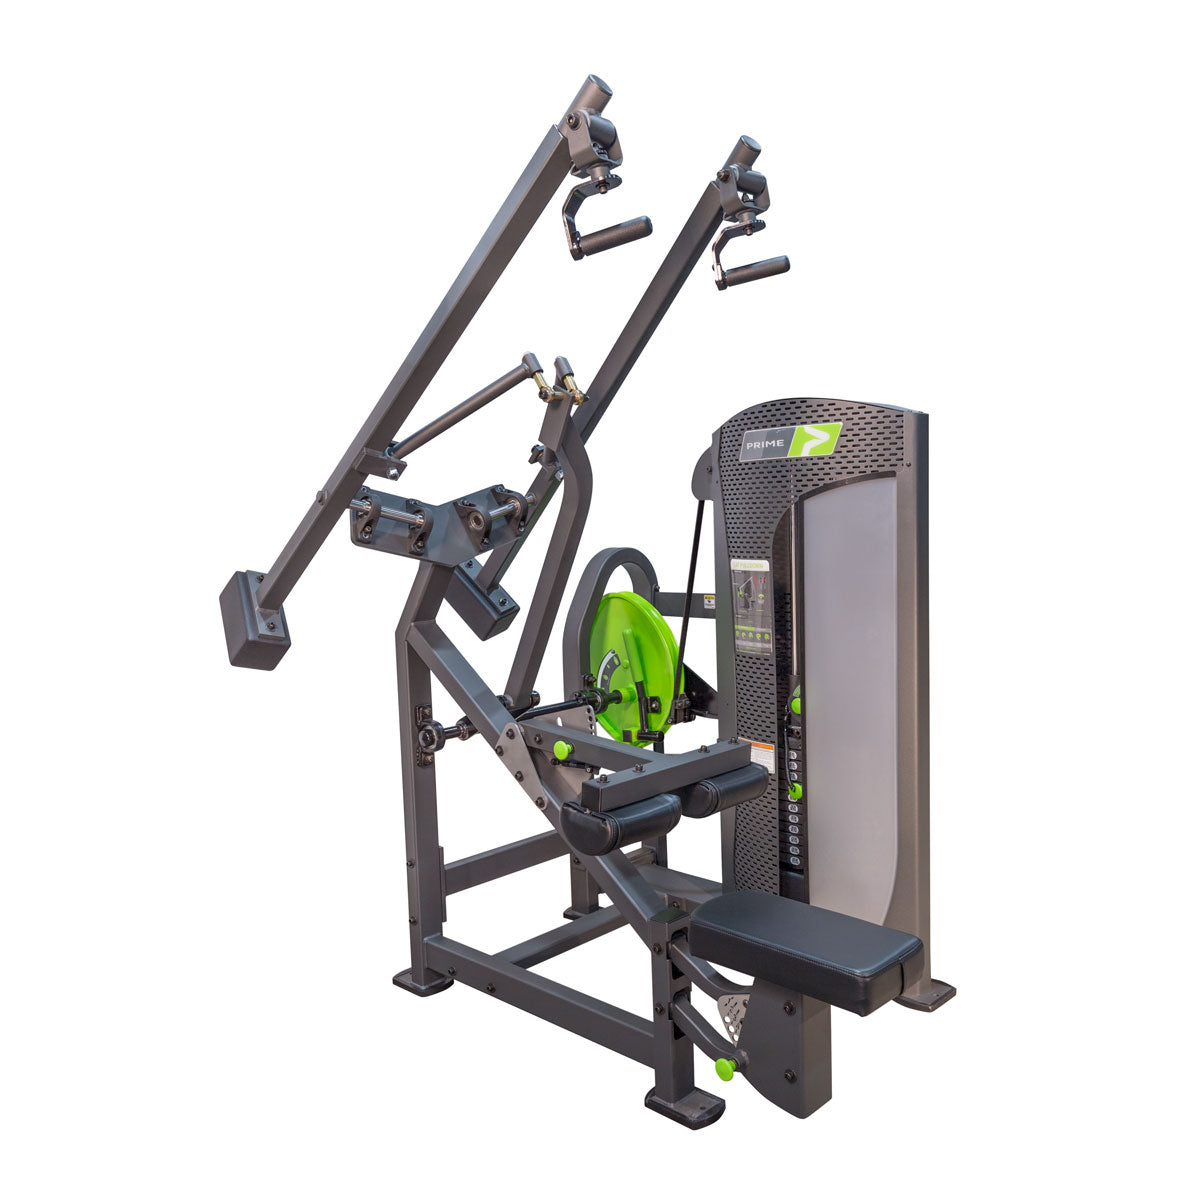 The PRIME Plate Loaded Leg Extension . This machine features our